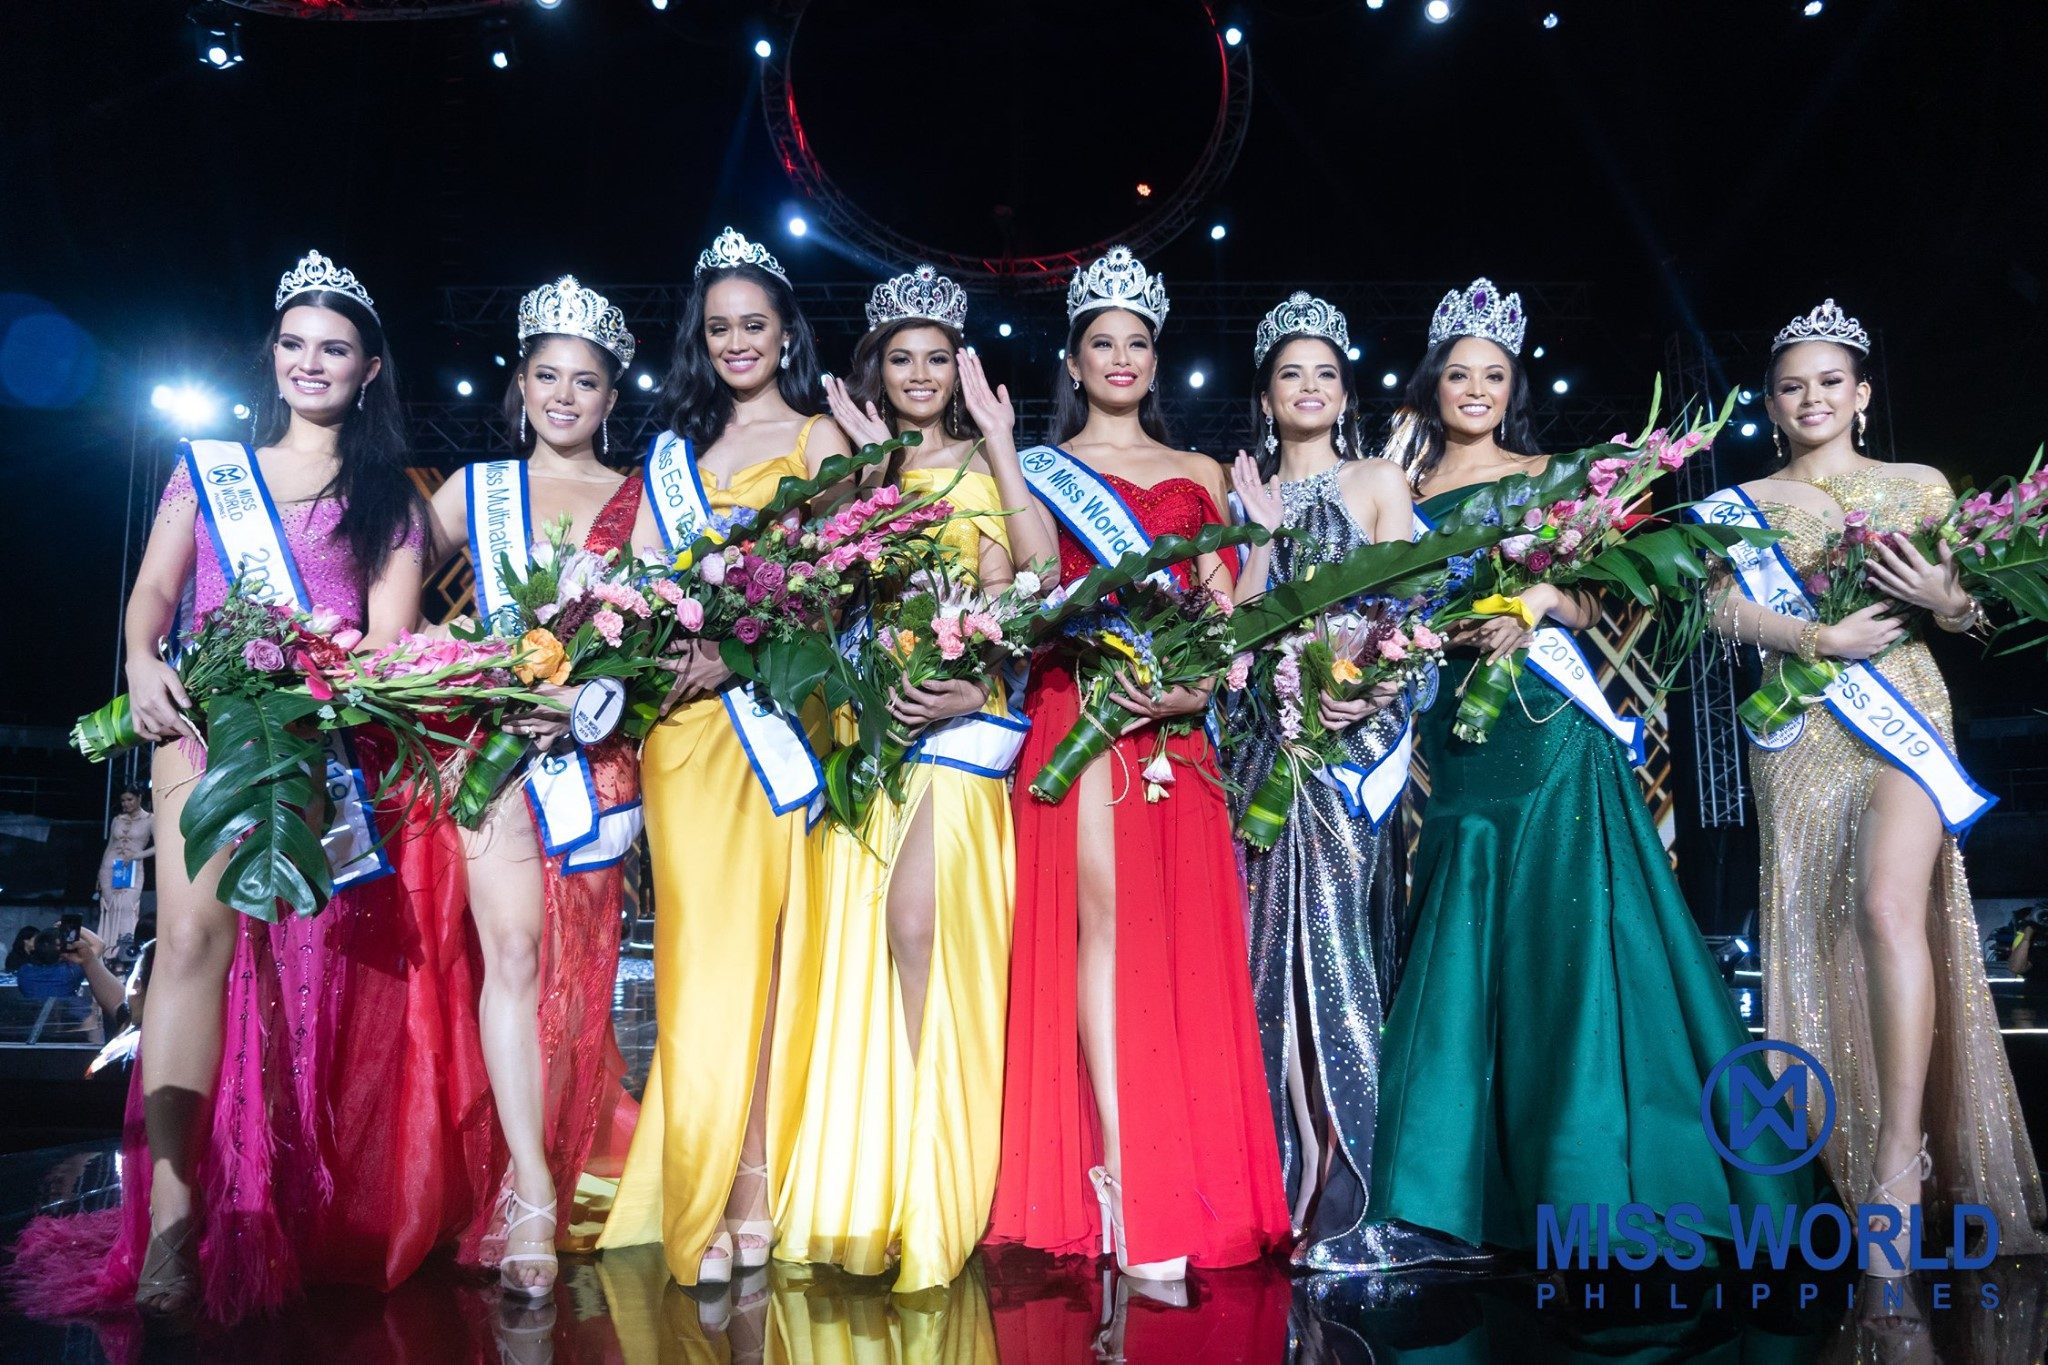 Where to watch the Miss World Philippines 2021 coronation night live